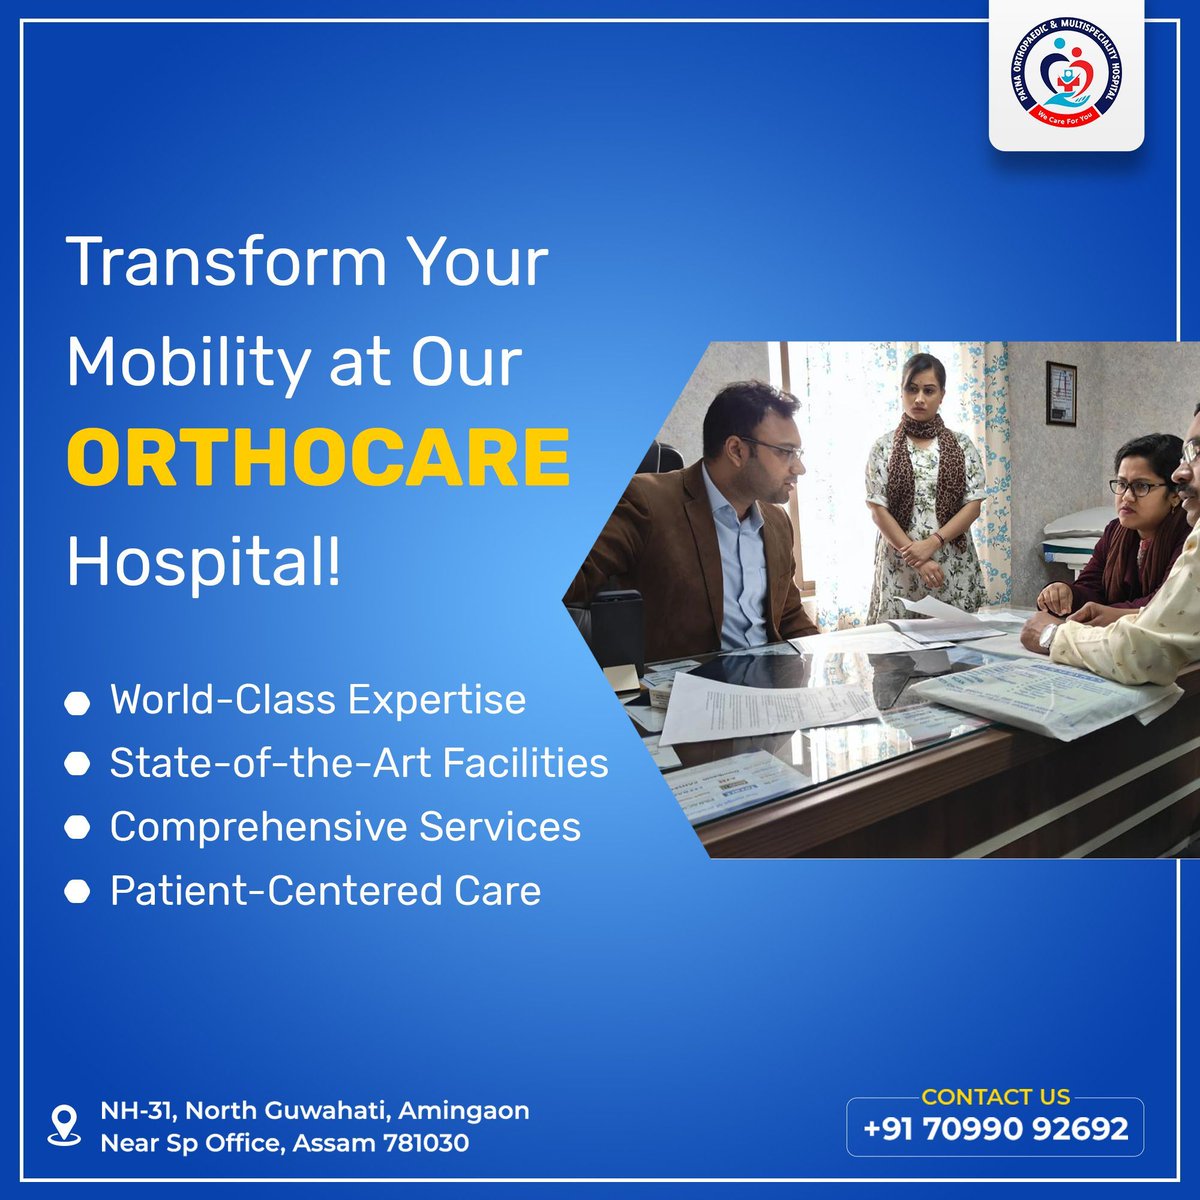 Step into a world where mobility knows no bounds! At Our ORTHOCARE Hospital, your transformation journey is backed by our world-class expertise, state-of-the-art facilities, and unwavering patient-centered care.

#MobilityTransformation
#OrthoCareExcellence